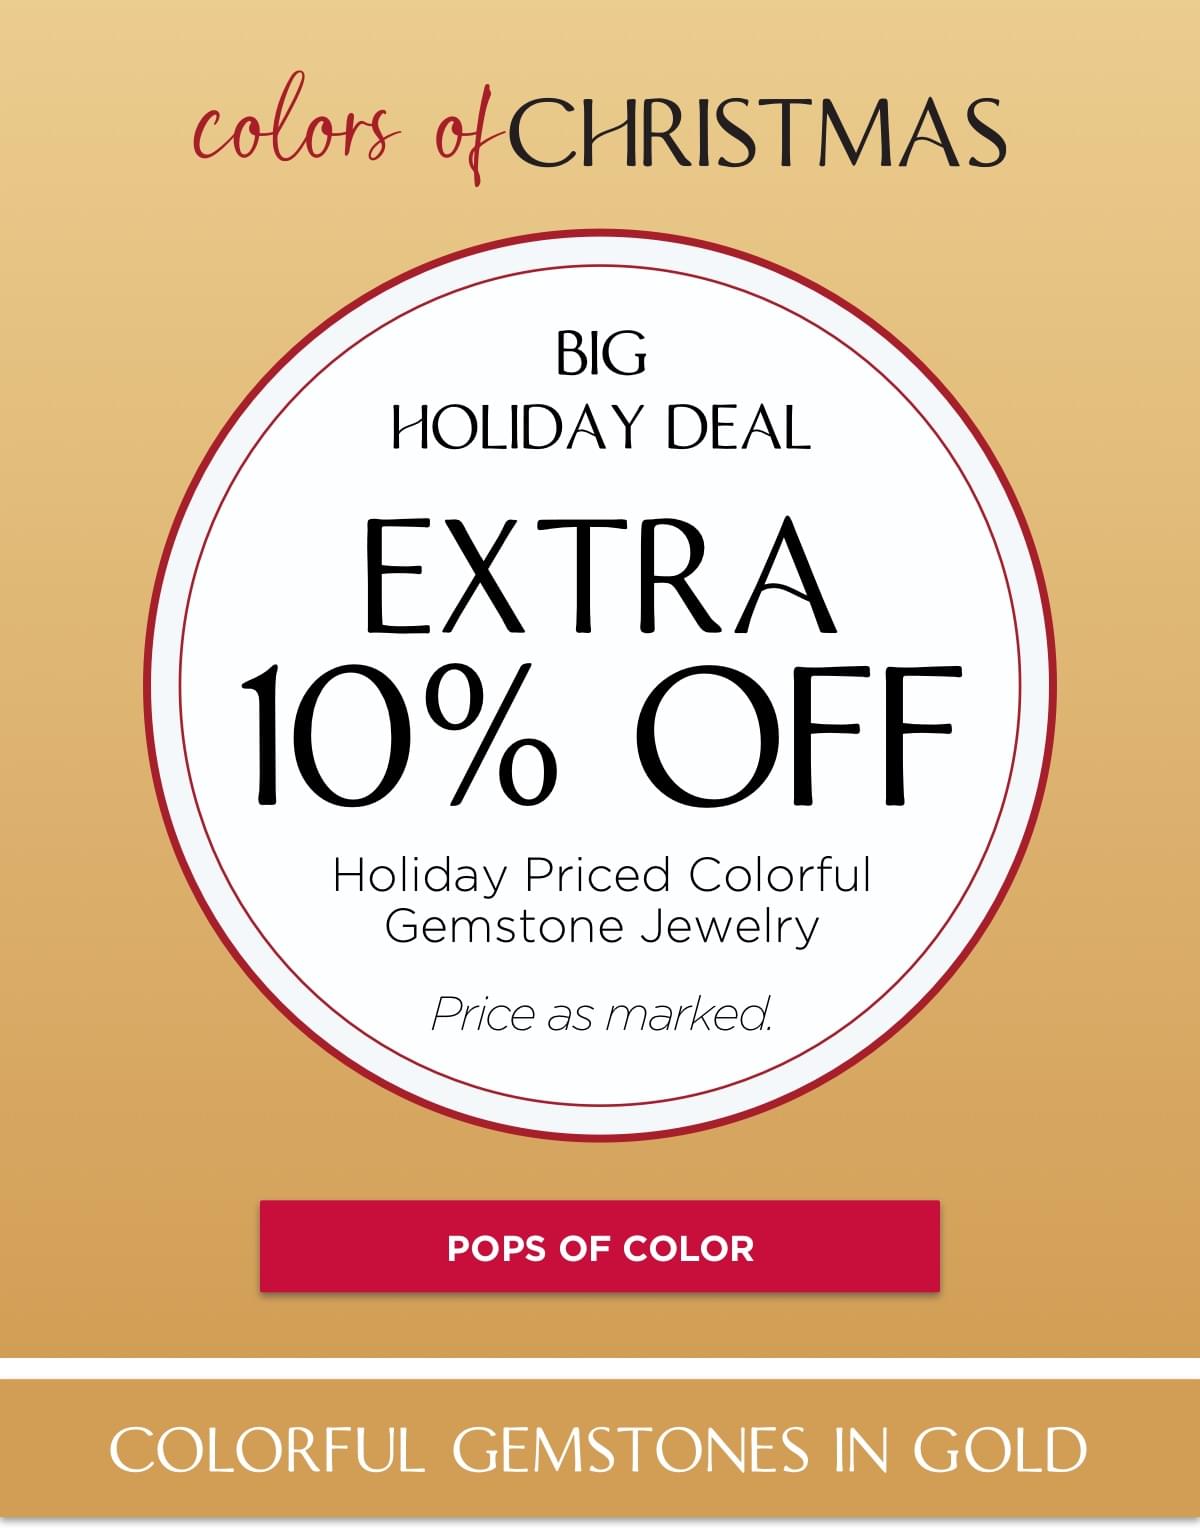 Big Holiday Deal! Extra 10% off Holiday Price on Color Gemstone Jewelry. Priced as Marked